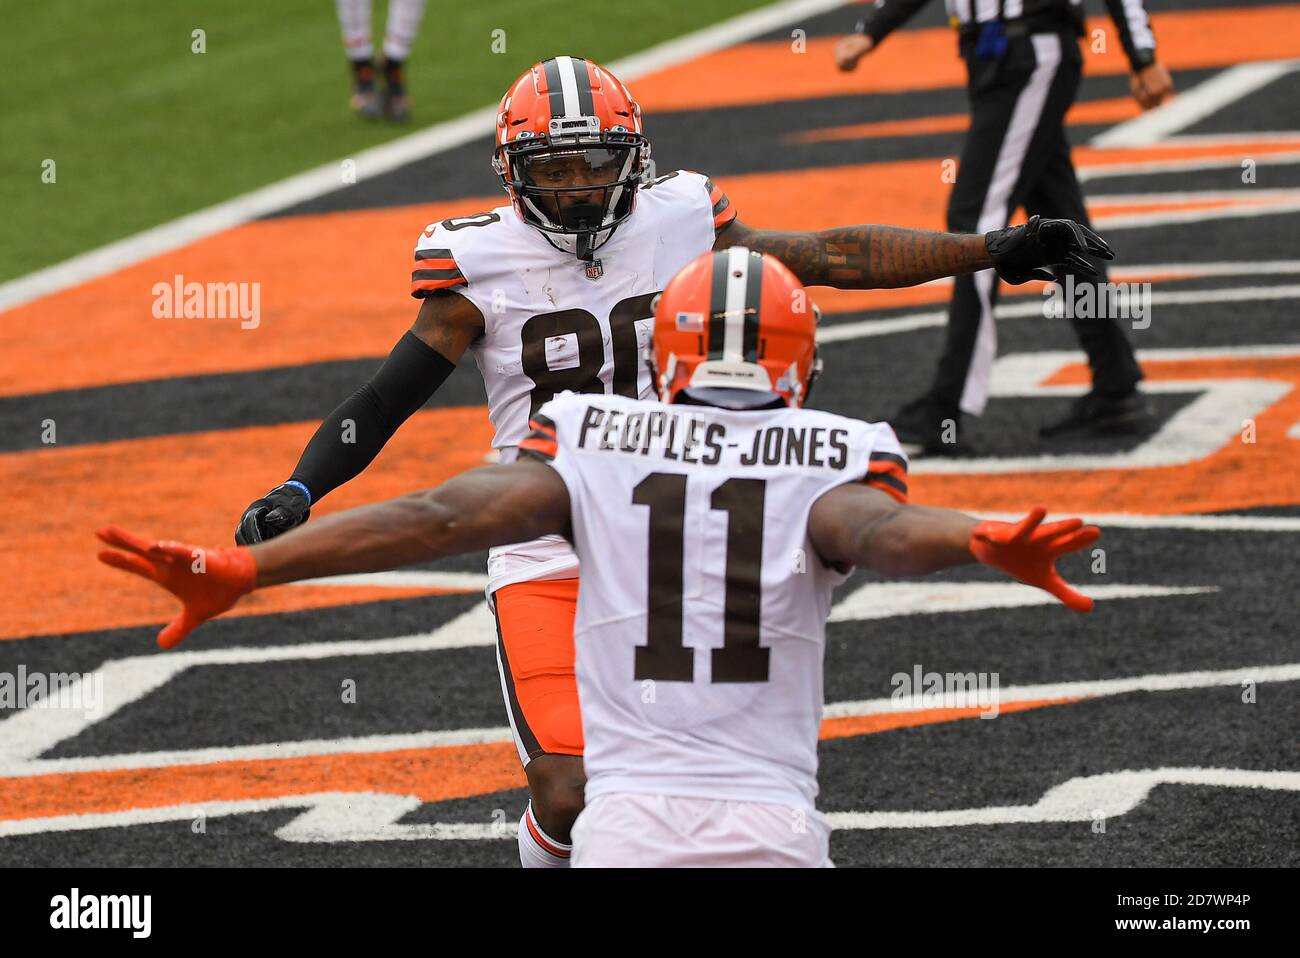 Cincinnati, OH, USA. 25th Oct, 2020. Donovan Peoples-Jones #11 of the Cleveland Browns celebrates with Jarvis Landry #80 of the Cleveland Browns after scoring the game winning touchdown during NFL football game action between the Cleveland Browns and the Cincinnati Bengals at Paul Brown Stadium on October 25, 2020 in Cincinnati, OH. Adam Lacy/CSM/Alamy Live News Stock Photo